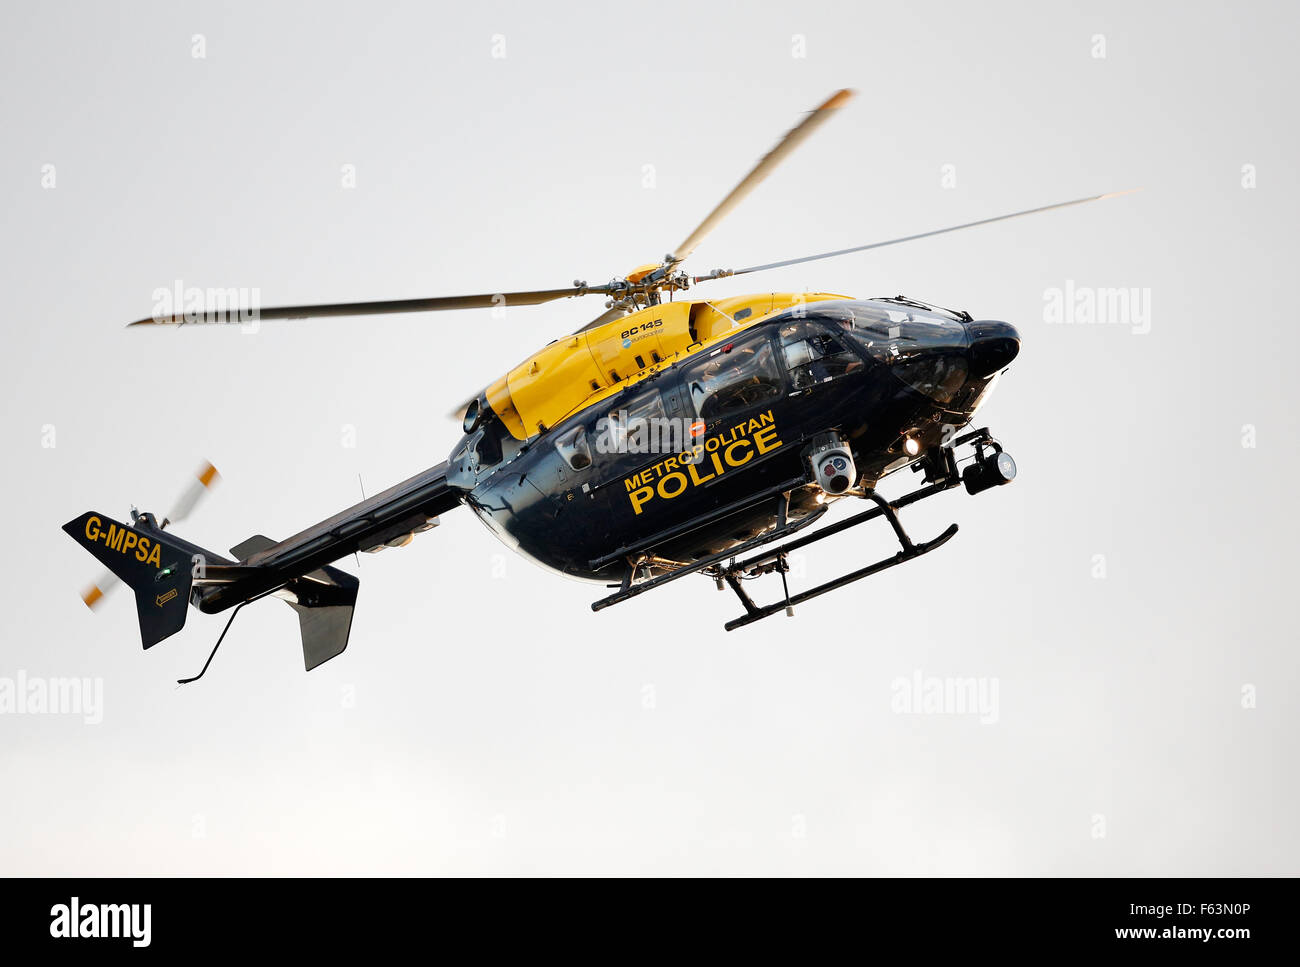 A Metropolitan Police helicopter flies over London to observe crowd movement during a major sports event in the capital. Stock Photo